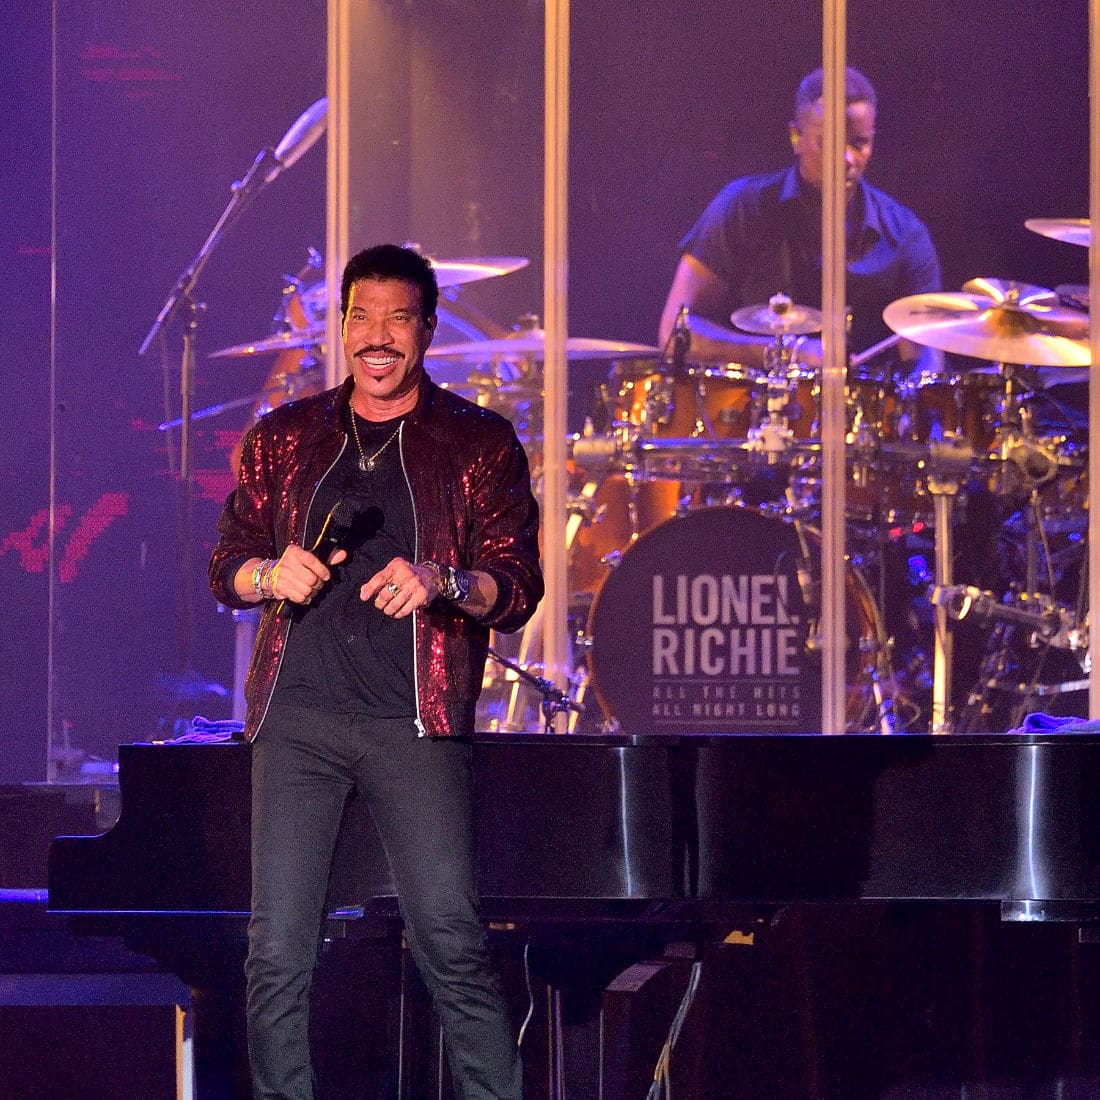 Lionel Richie at the 29th Blues Fest in Byron Bay 2018